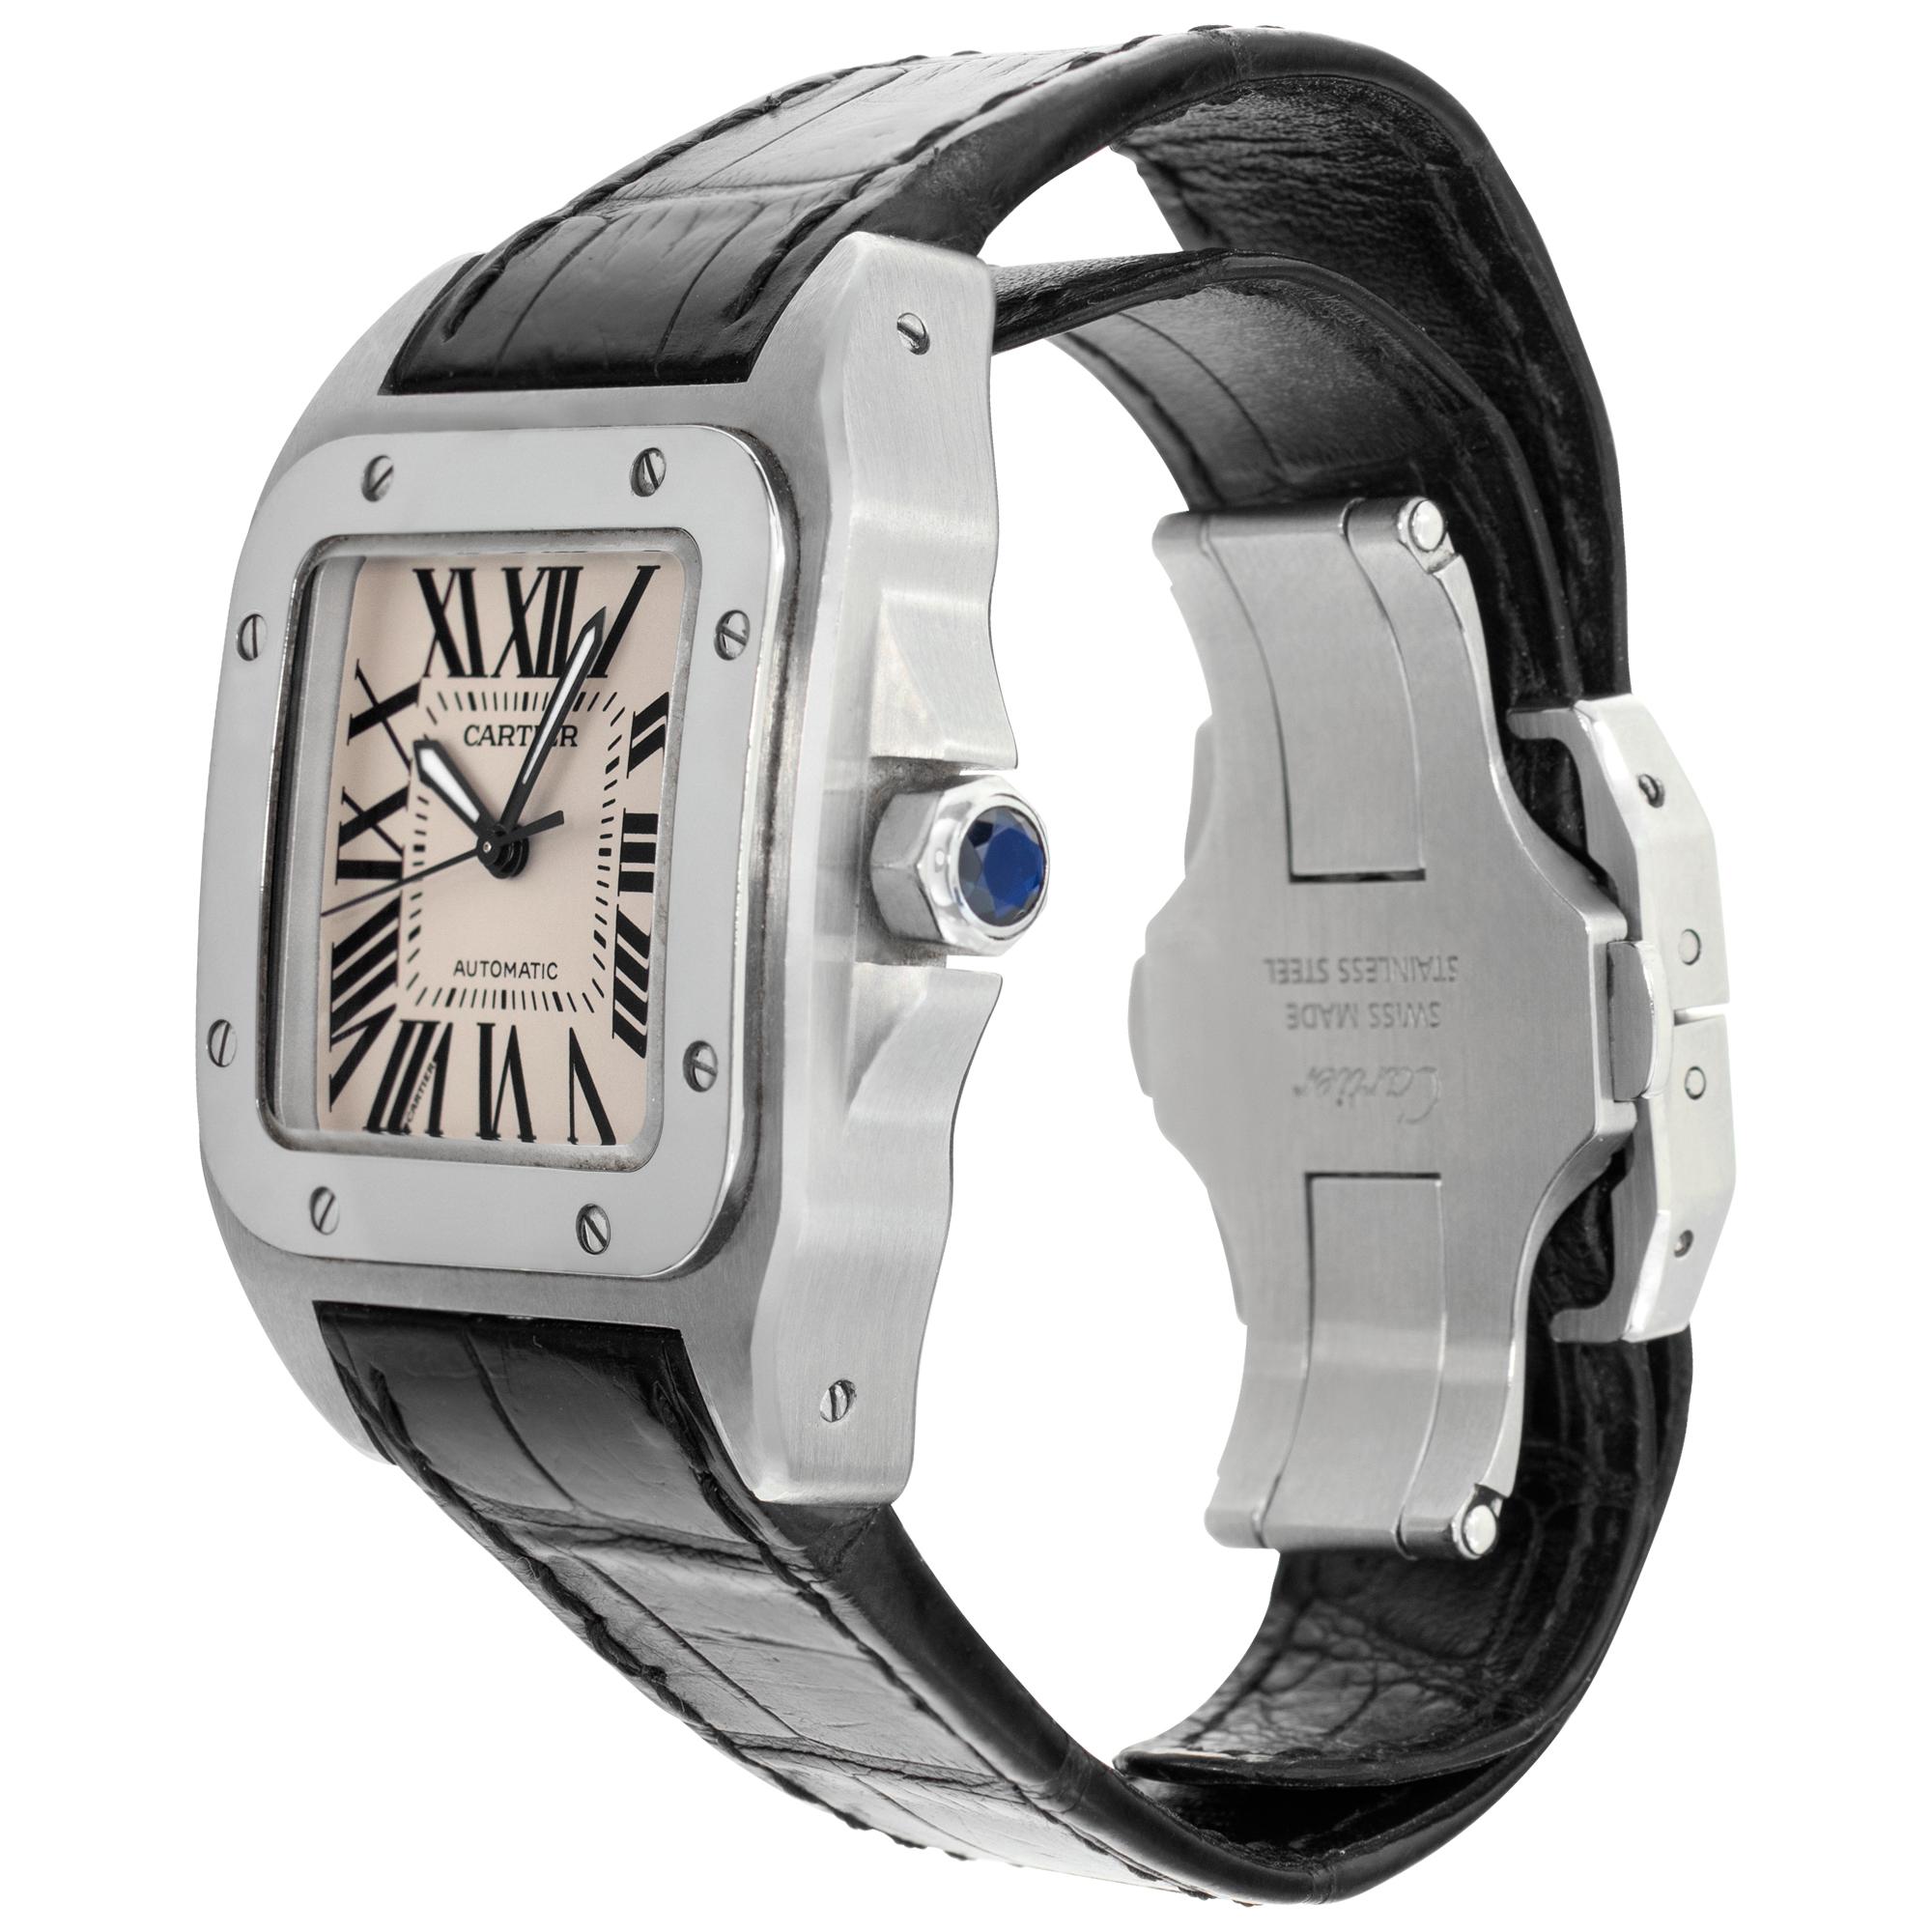 Cartier Santos 100 in stainless steel on black leather strap with deployant buckle. Auto w/ sweep seconds. 33 mm case size. Ref w20106x8. Fine Pre-owned Cartier Watch.

 Certified preowned Classic Cartier Santos 100 w20106x8 watch is made out of